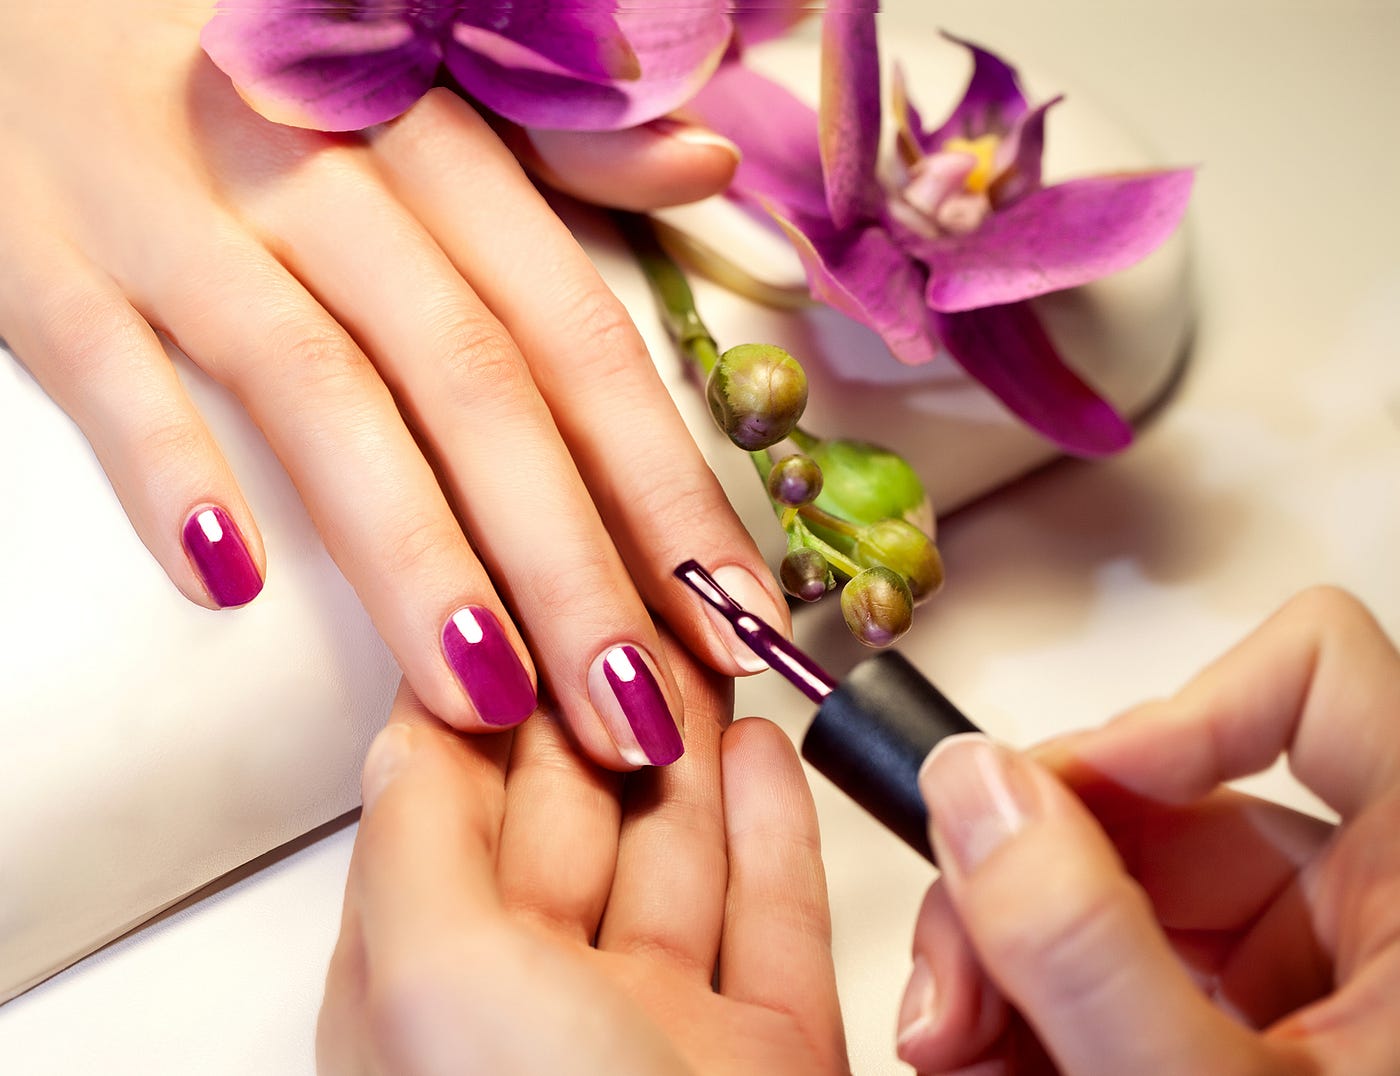 Nail Couture Unveiled 💅: The Exquisite World of Luxury Manicures Revealed!  ✨